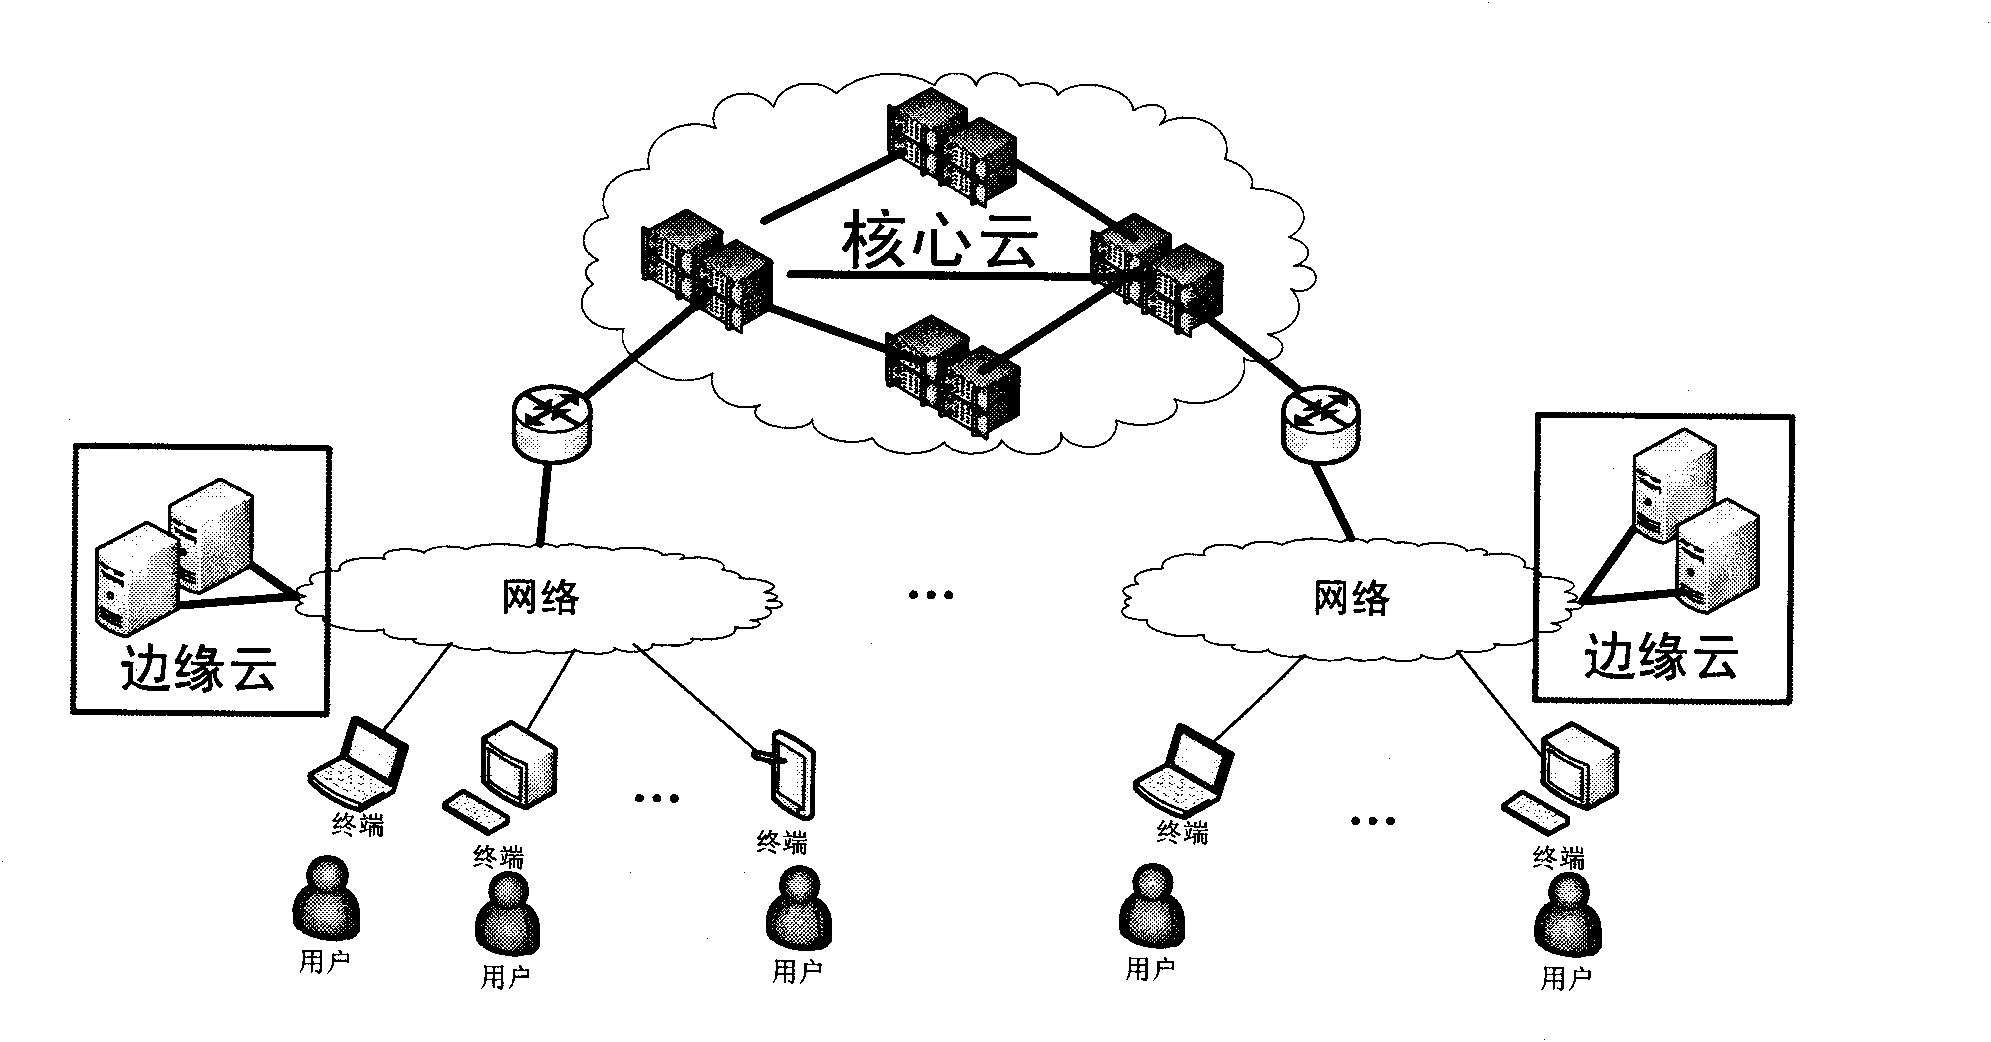 Layered distributed cloud computing architecture and service delivery method